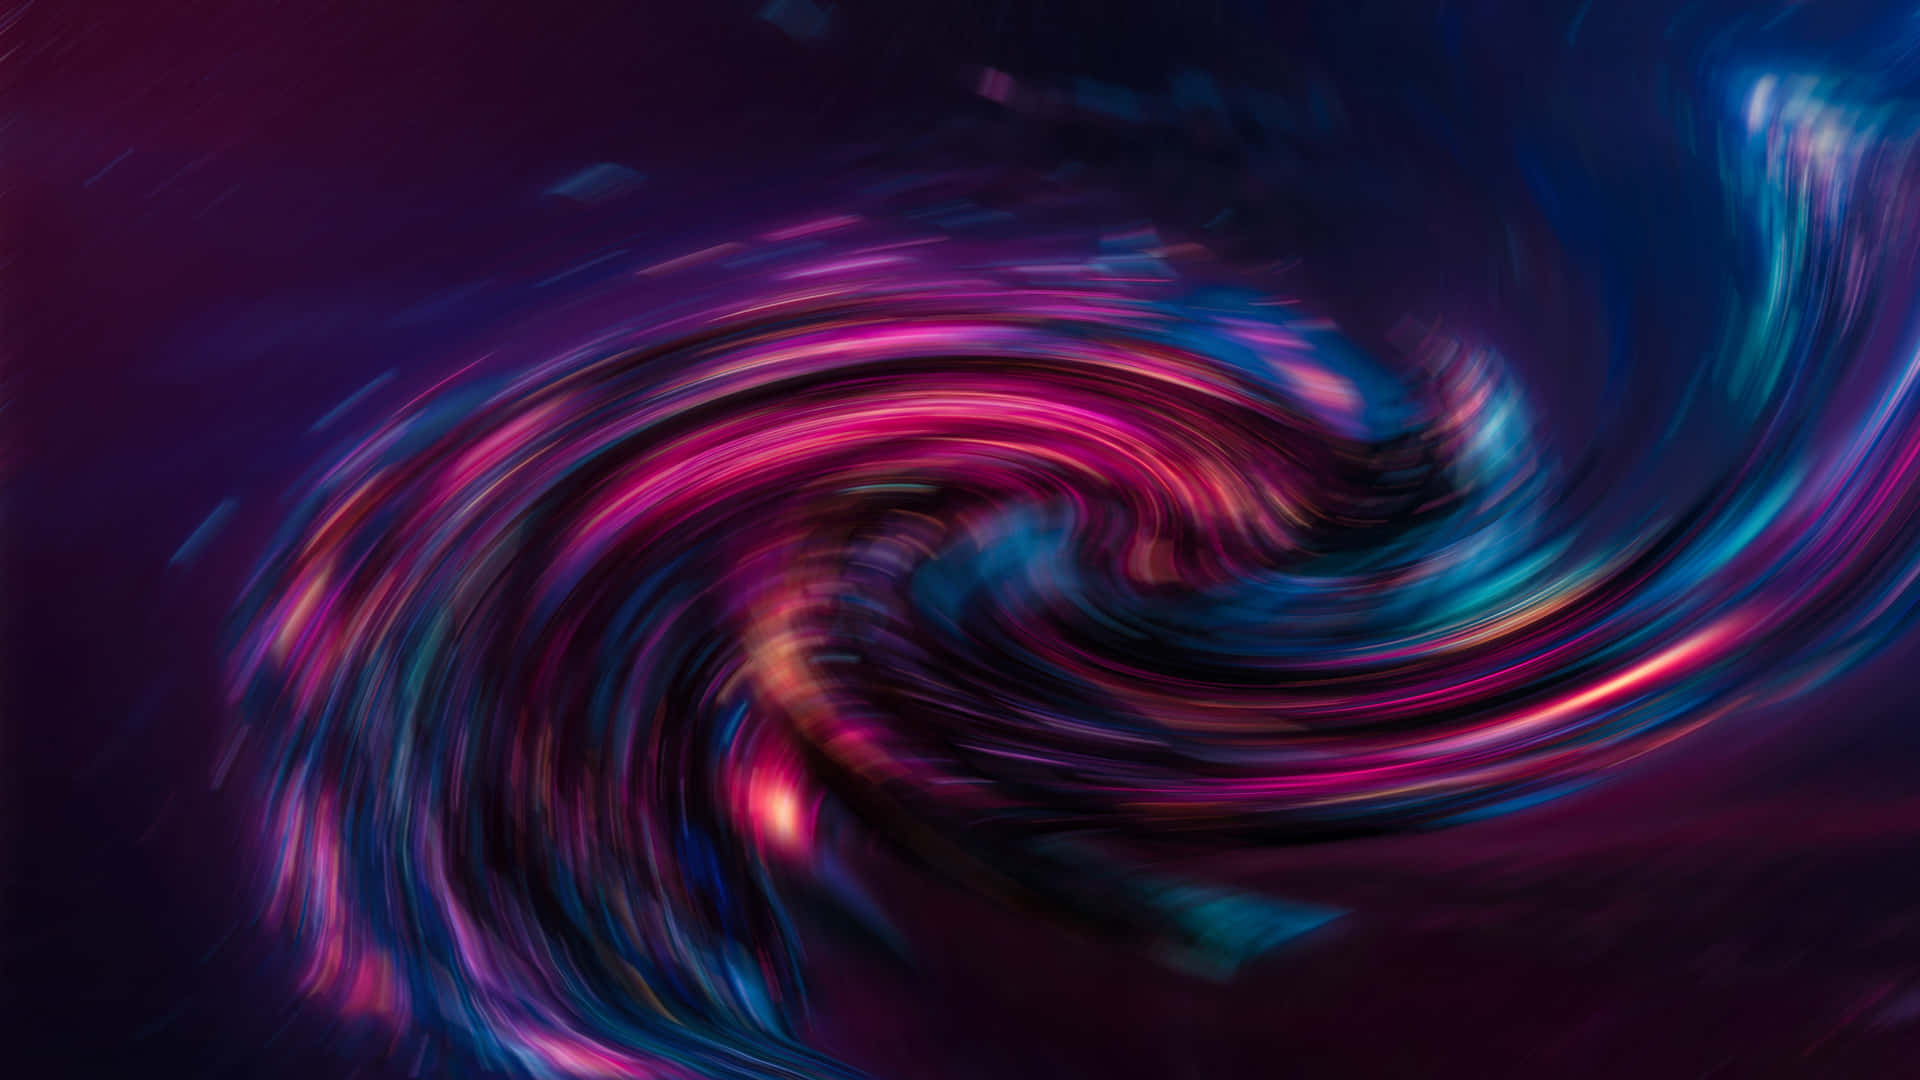 Abstract Design Colorful Pink Blue Purple 4K Wallpaper - Best Wallpapers